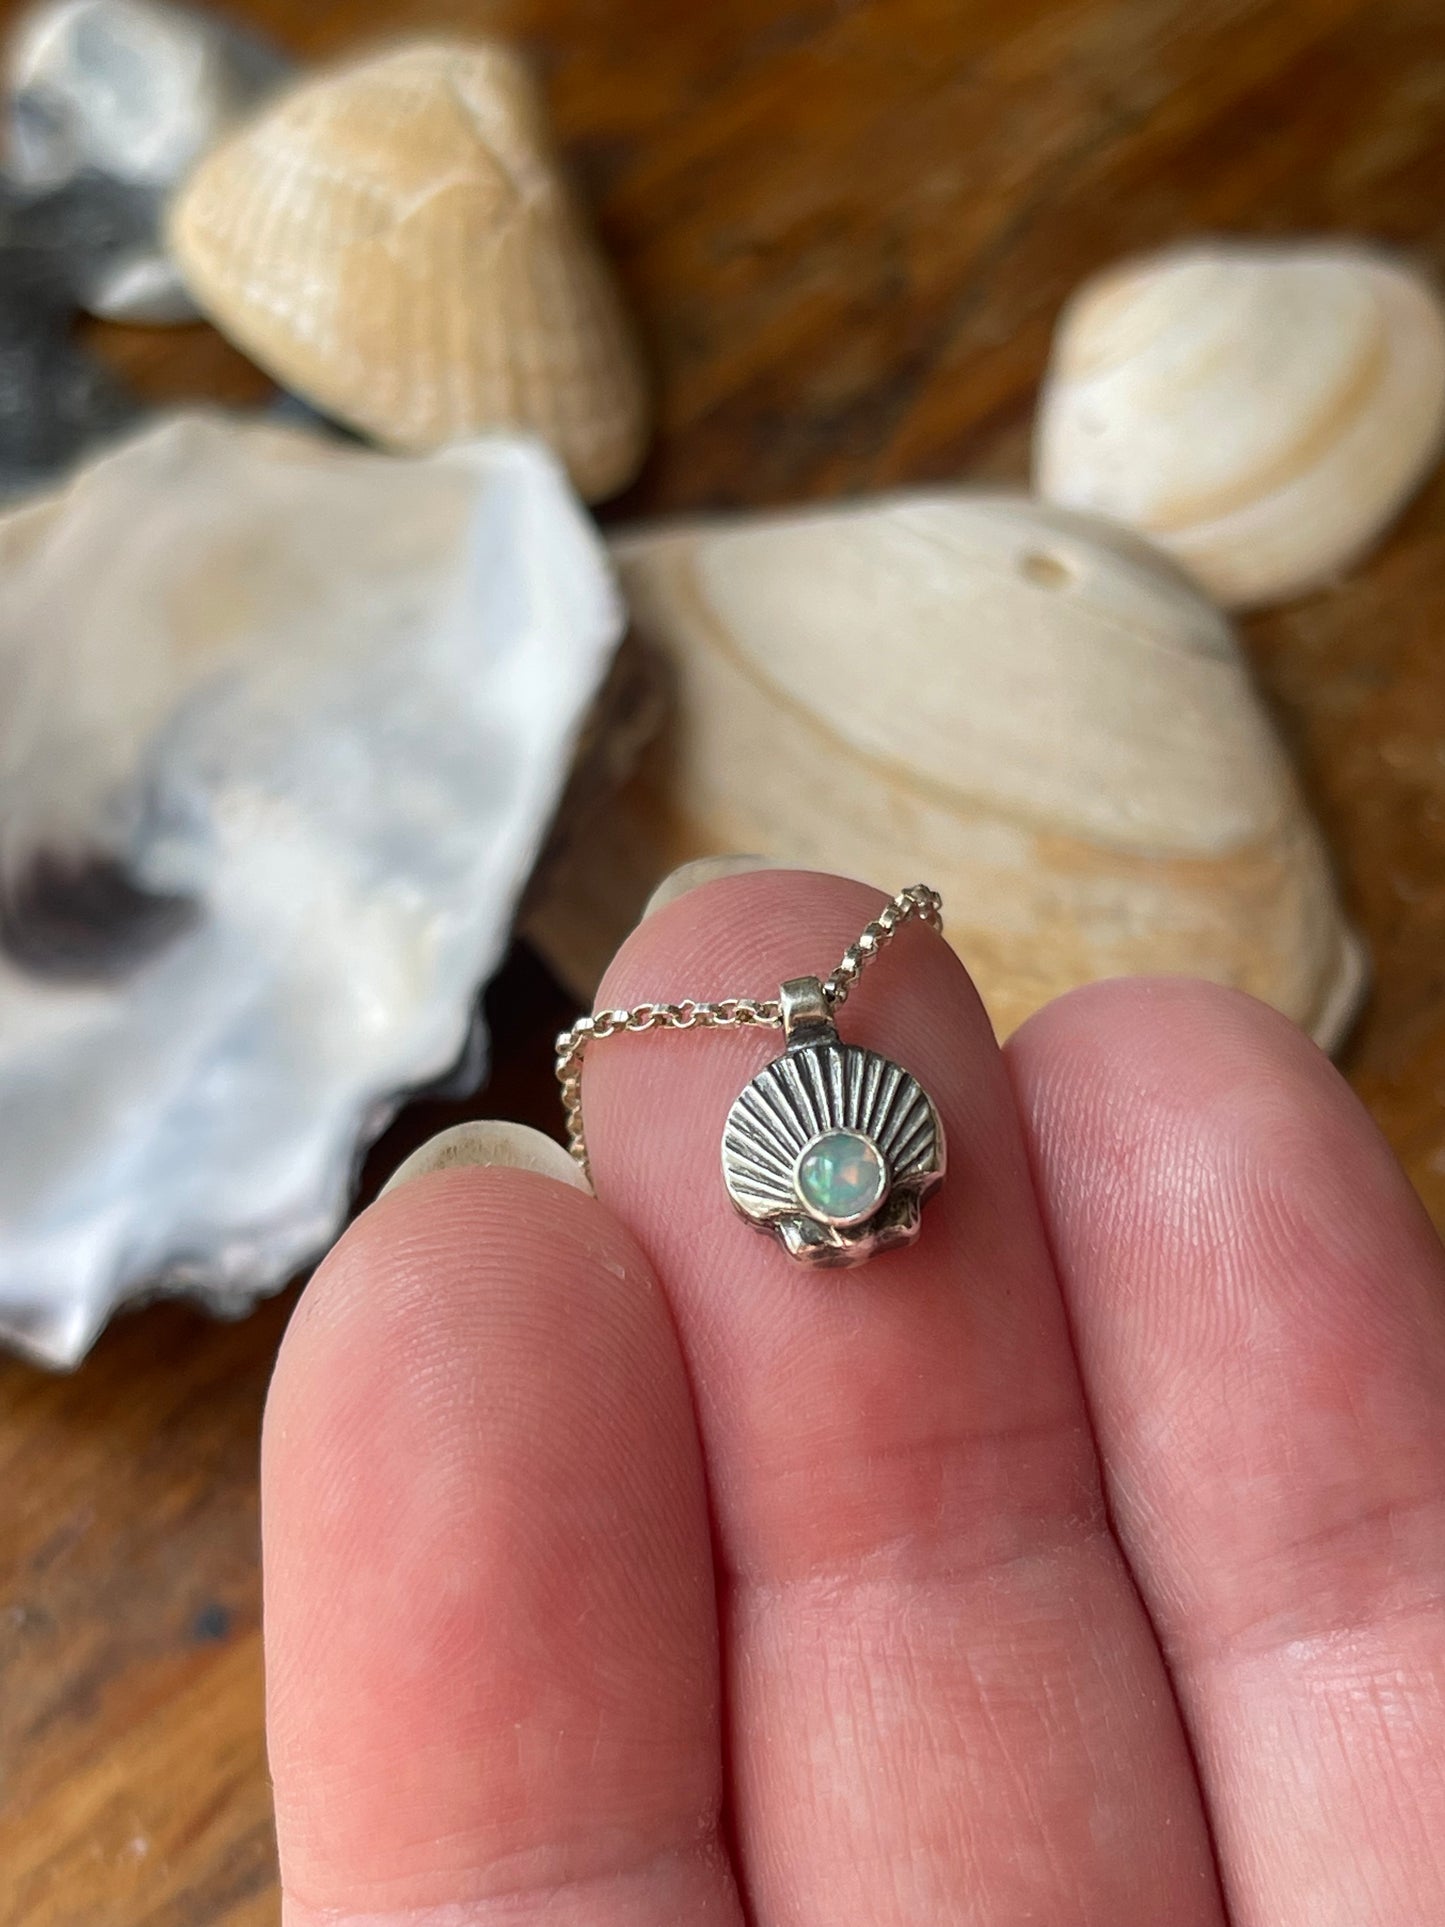 Ariel’s Charm • Silver Scallop Shell Charm Necklace